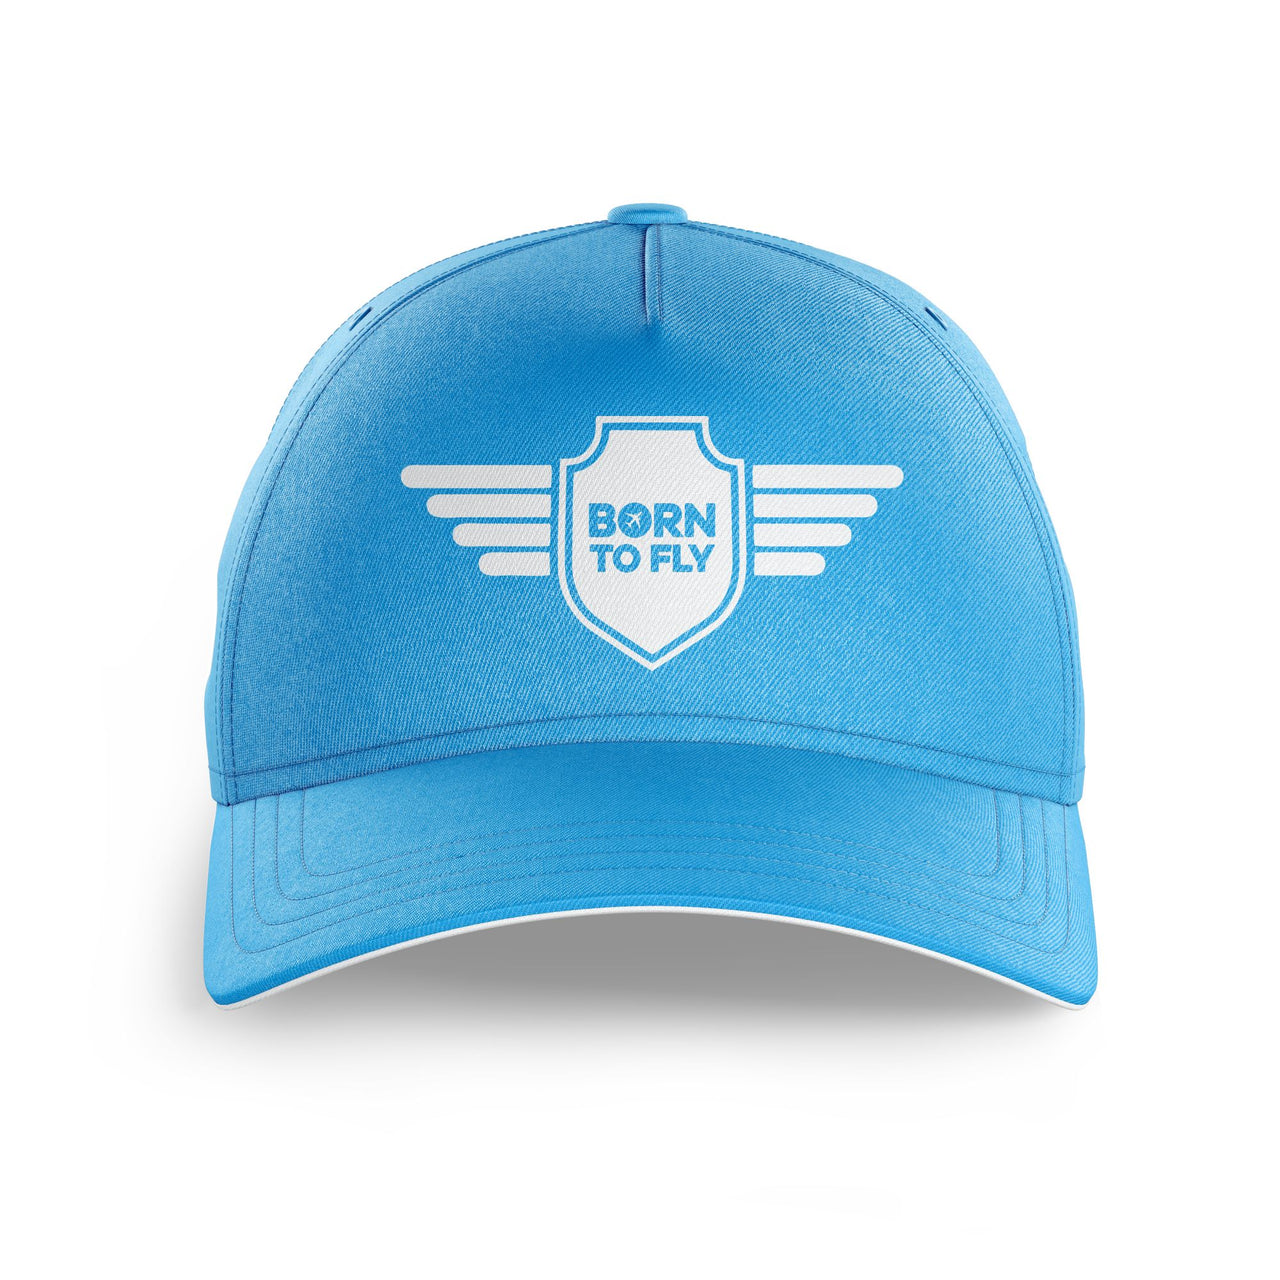 Born To Fly & Badge Printed Hats